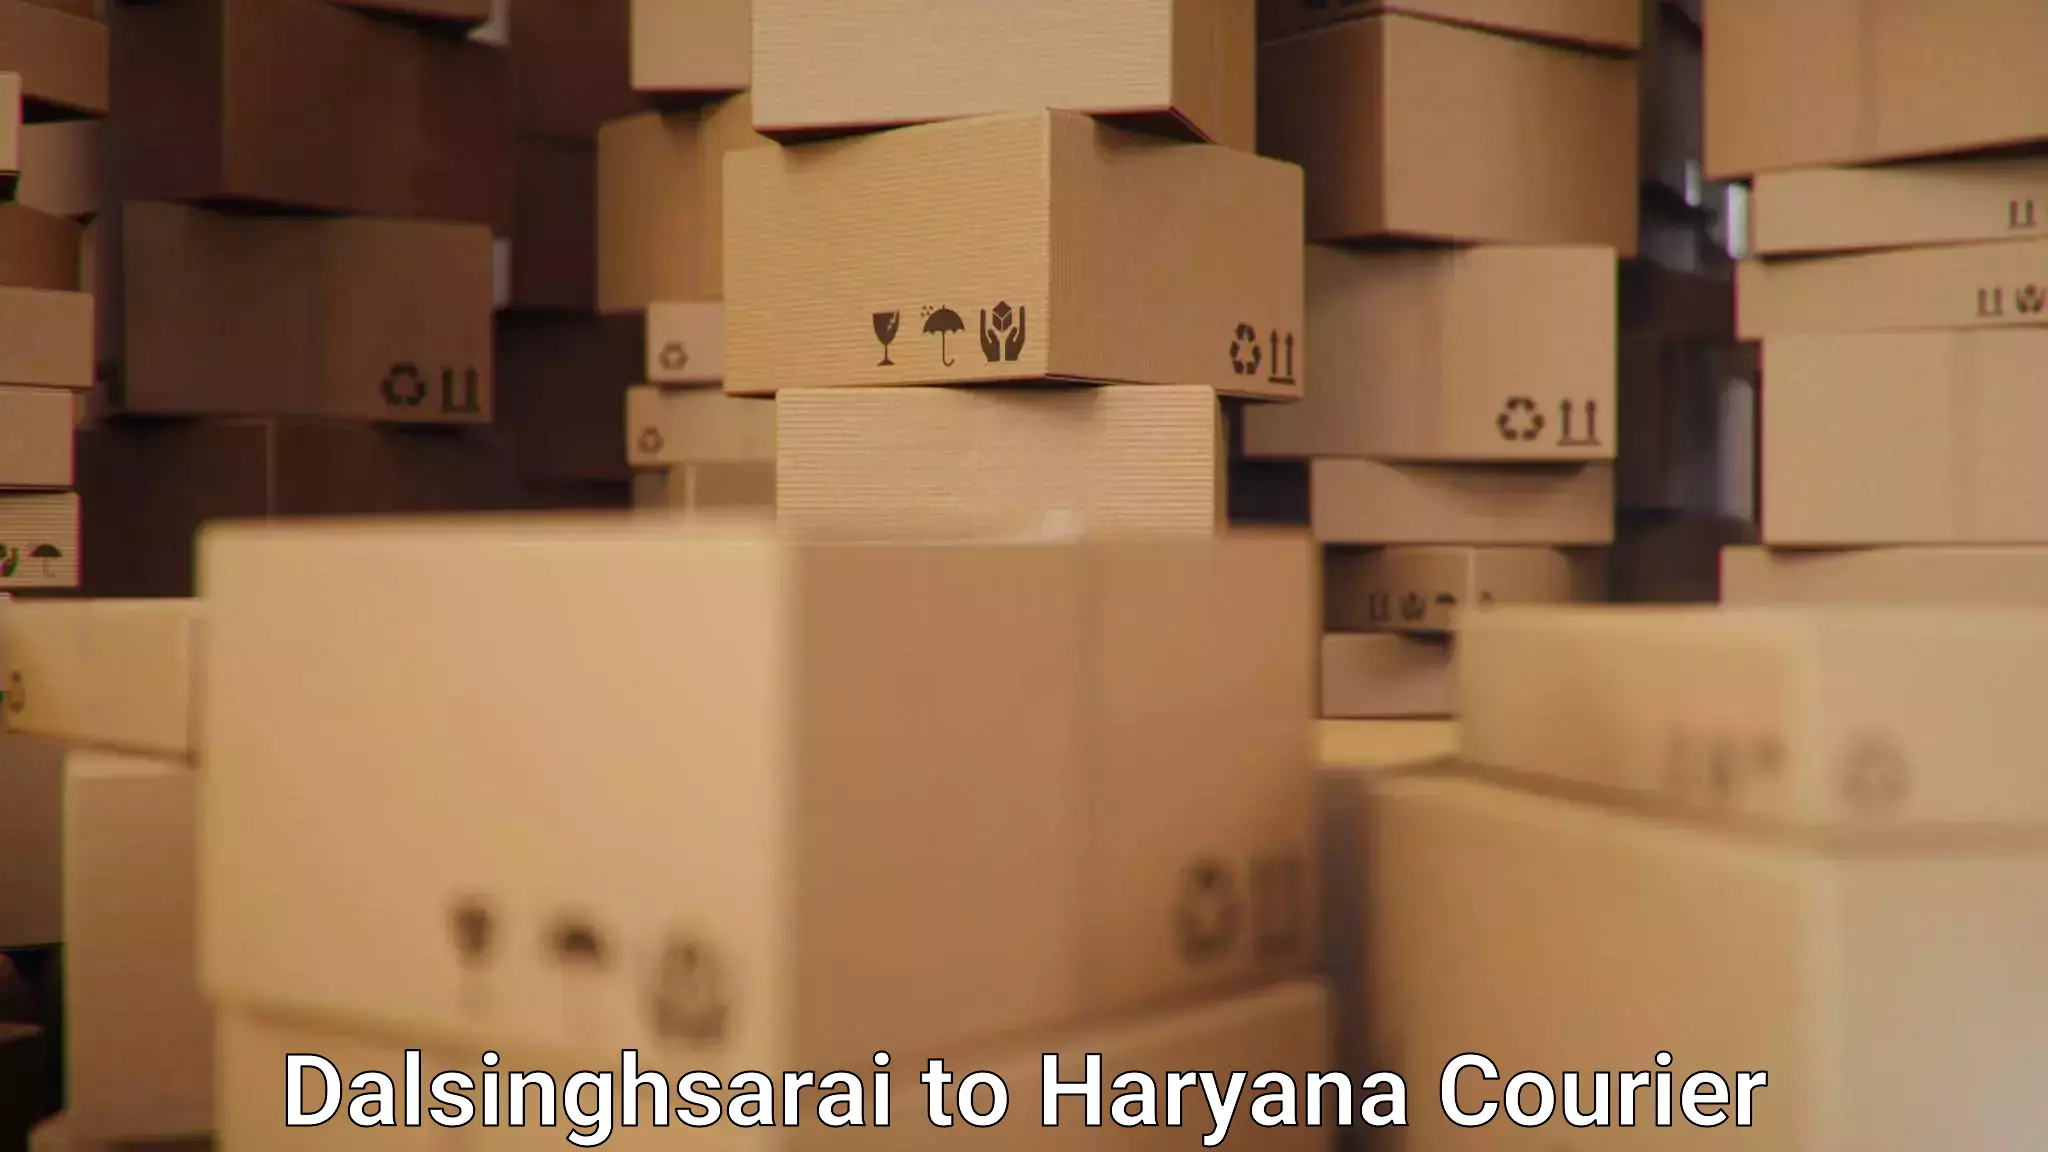 Rapid shipping services Dalsinghsarai to Panipat